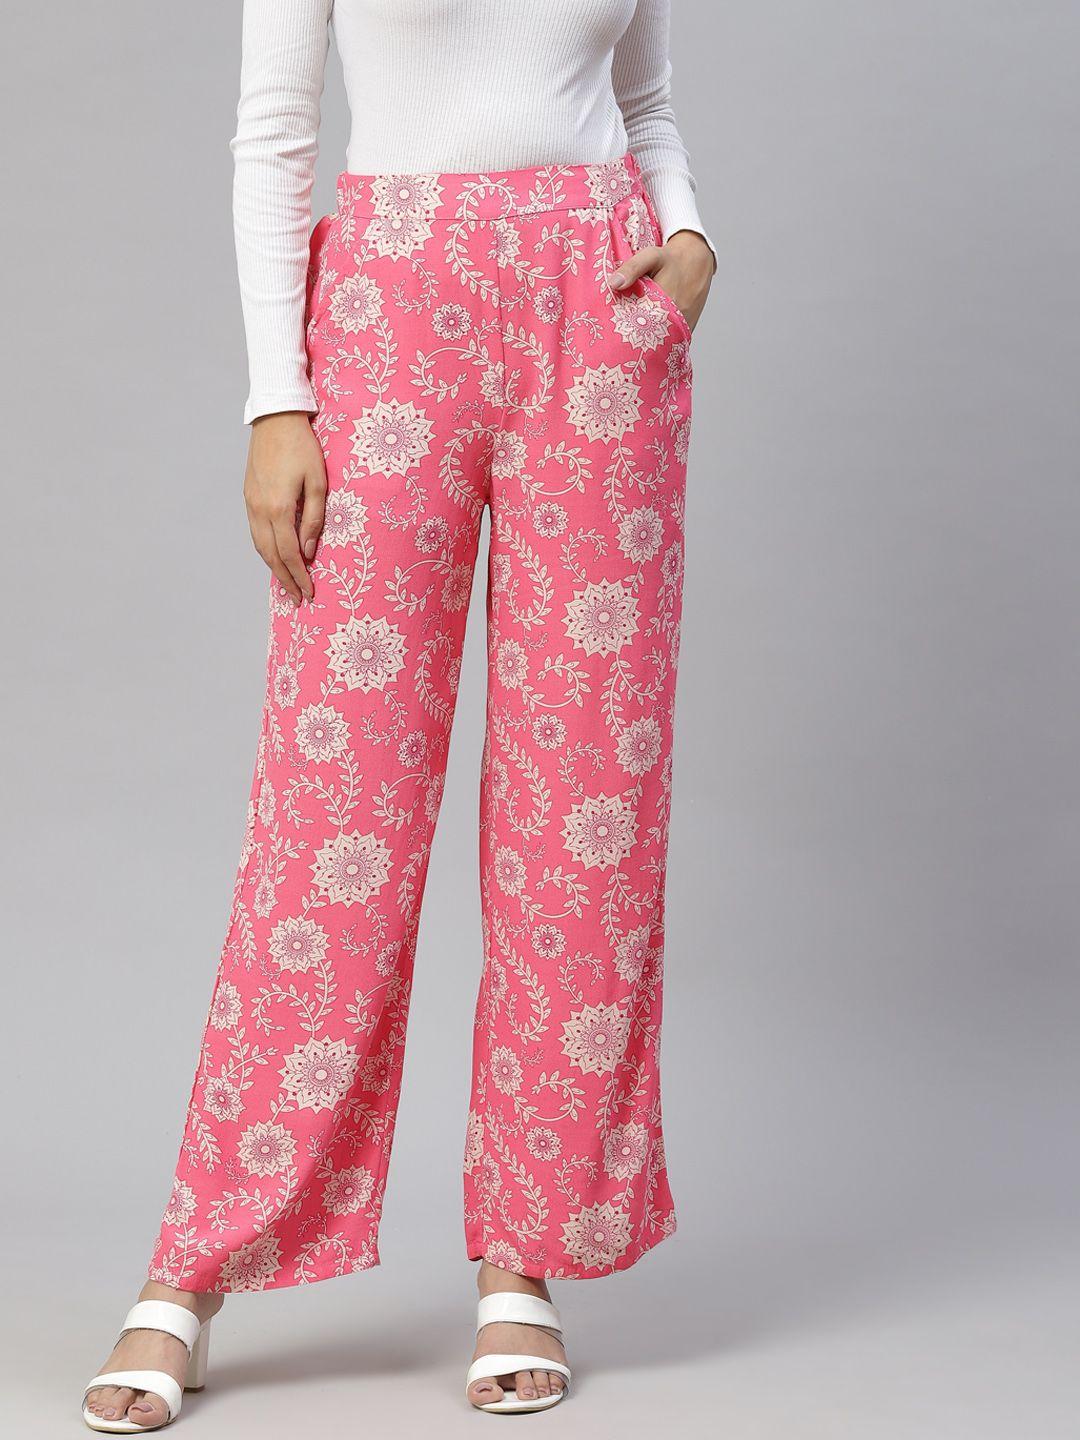 marks & spencer women pink & cream-coloured ethnic motifs printed high-rise trousers